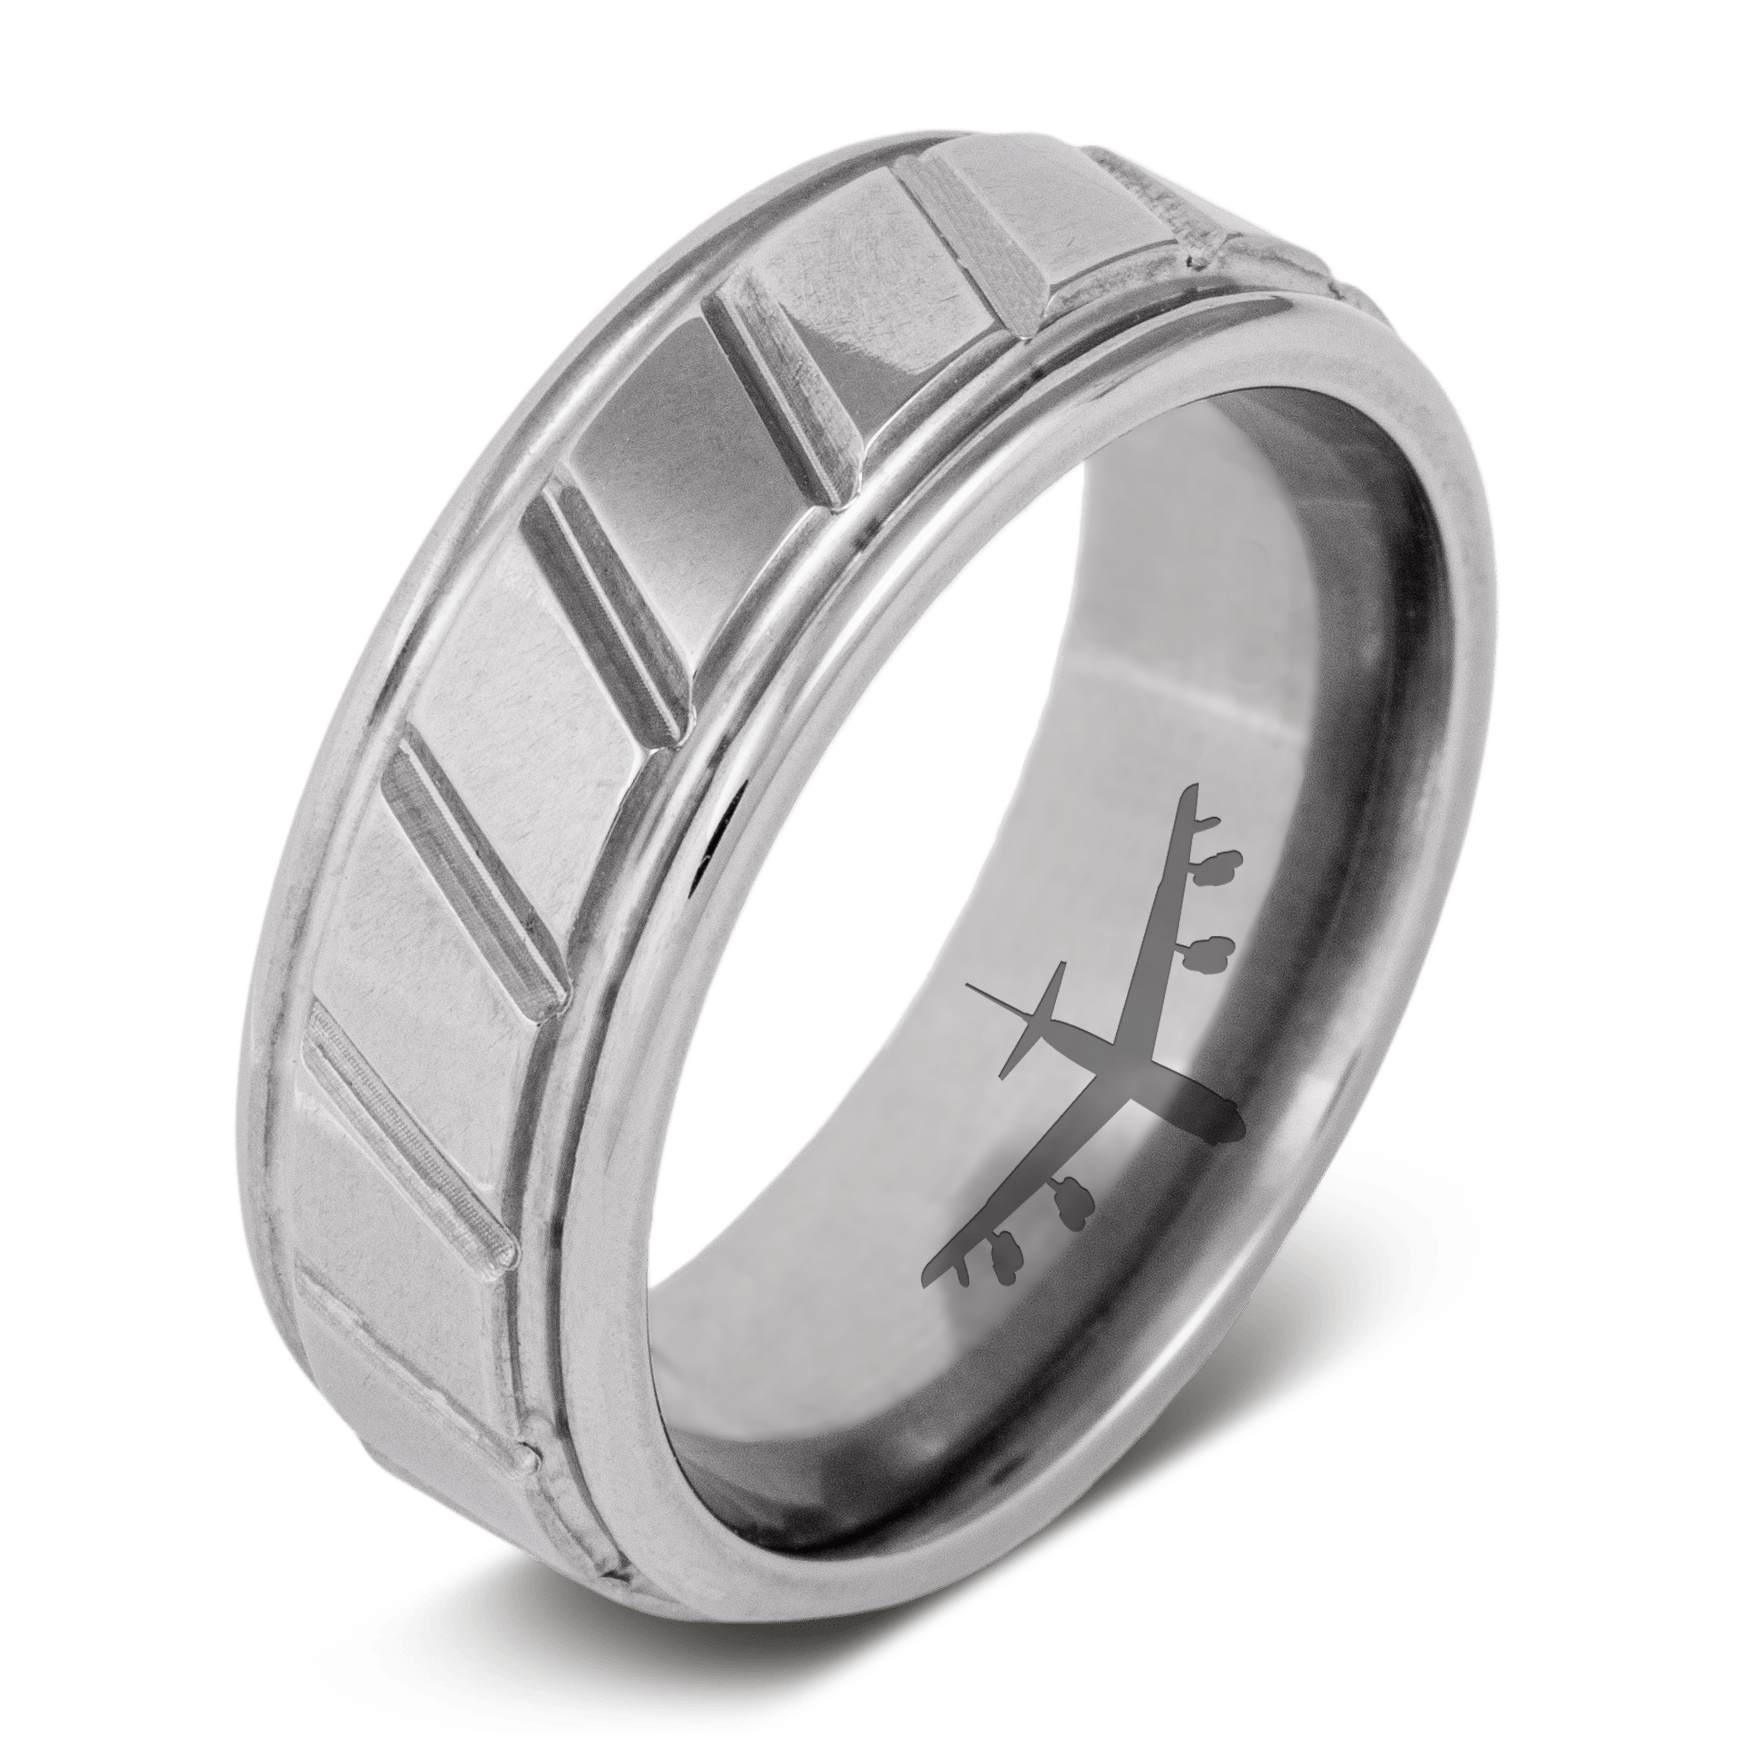 2022 New Gold Ring B Letter For Man,s – Welcome to Rani Alankar